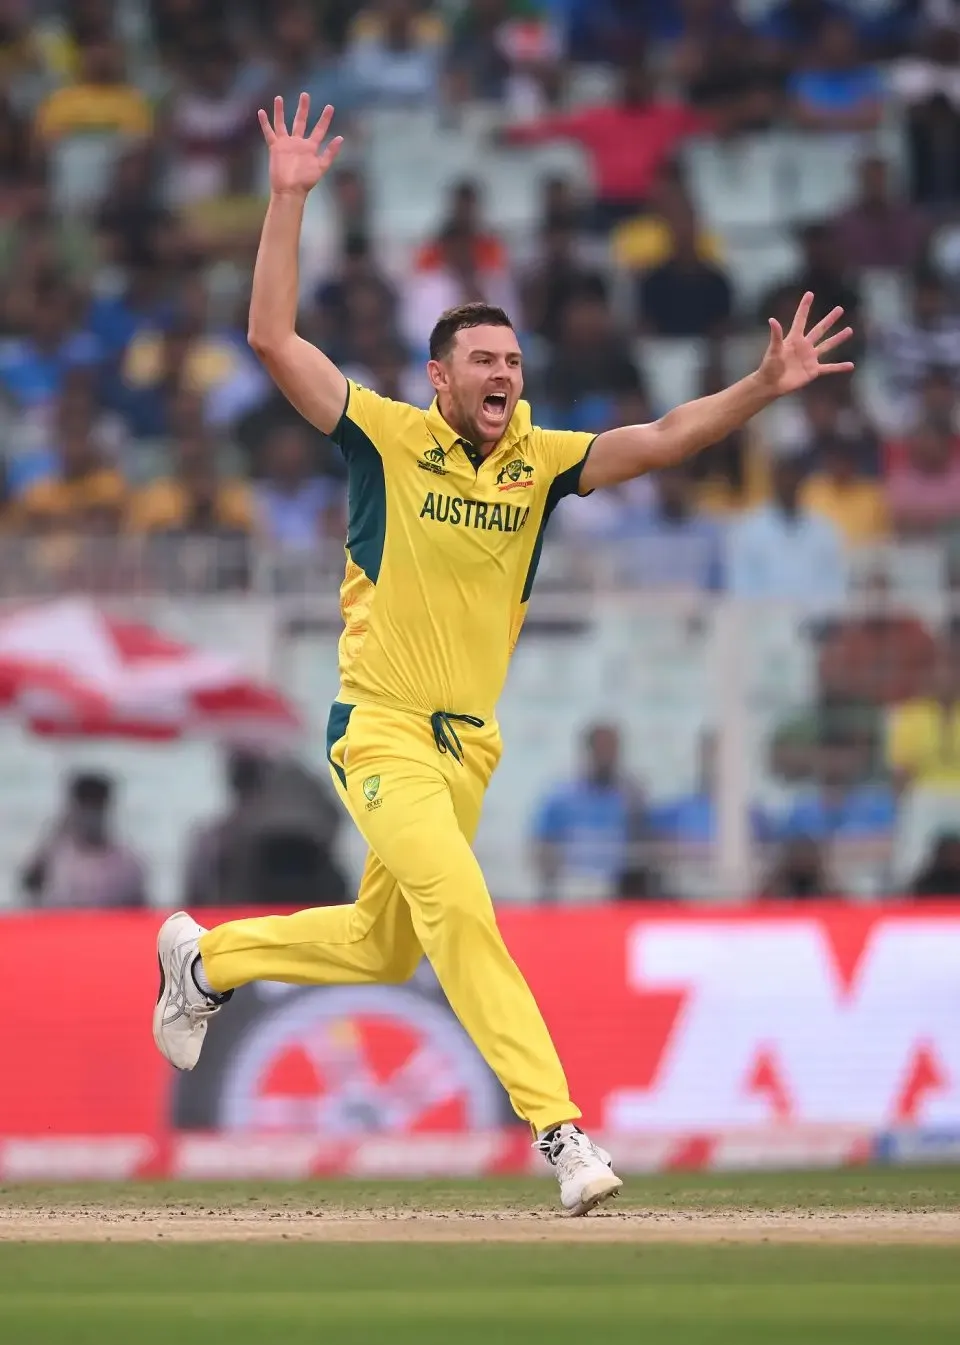 Hazlewood is showing his class in the powerplay  ICC via Getty Images